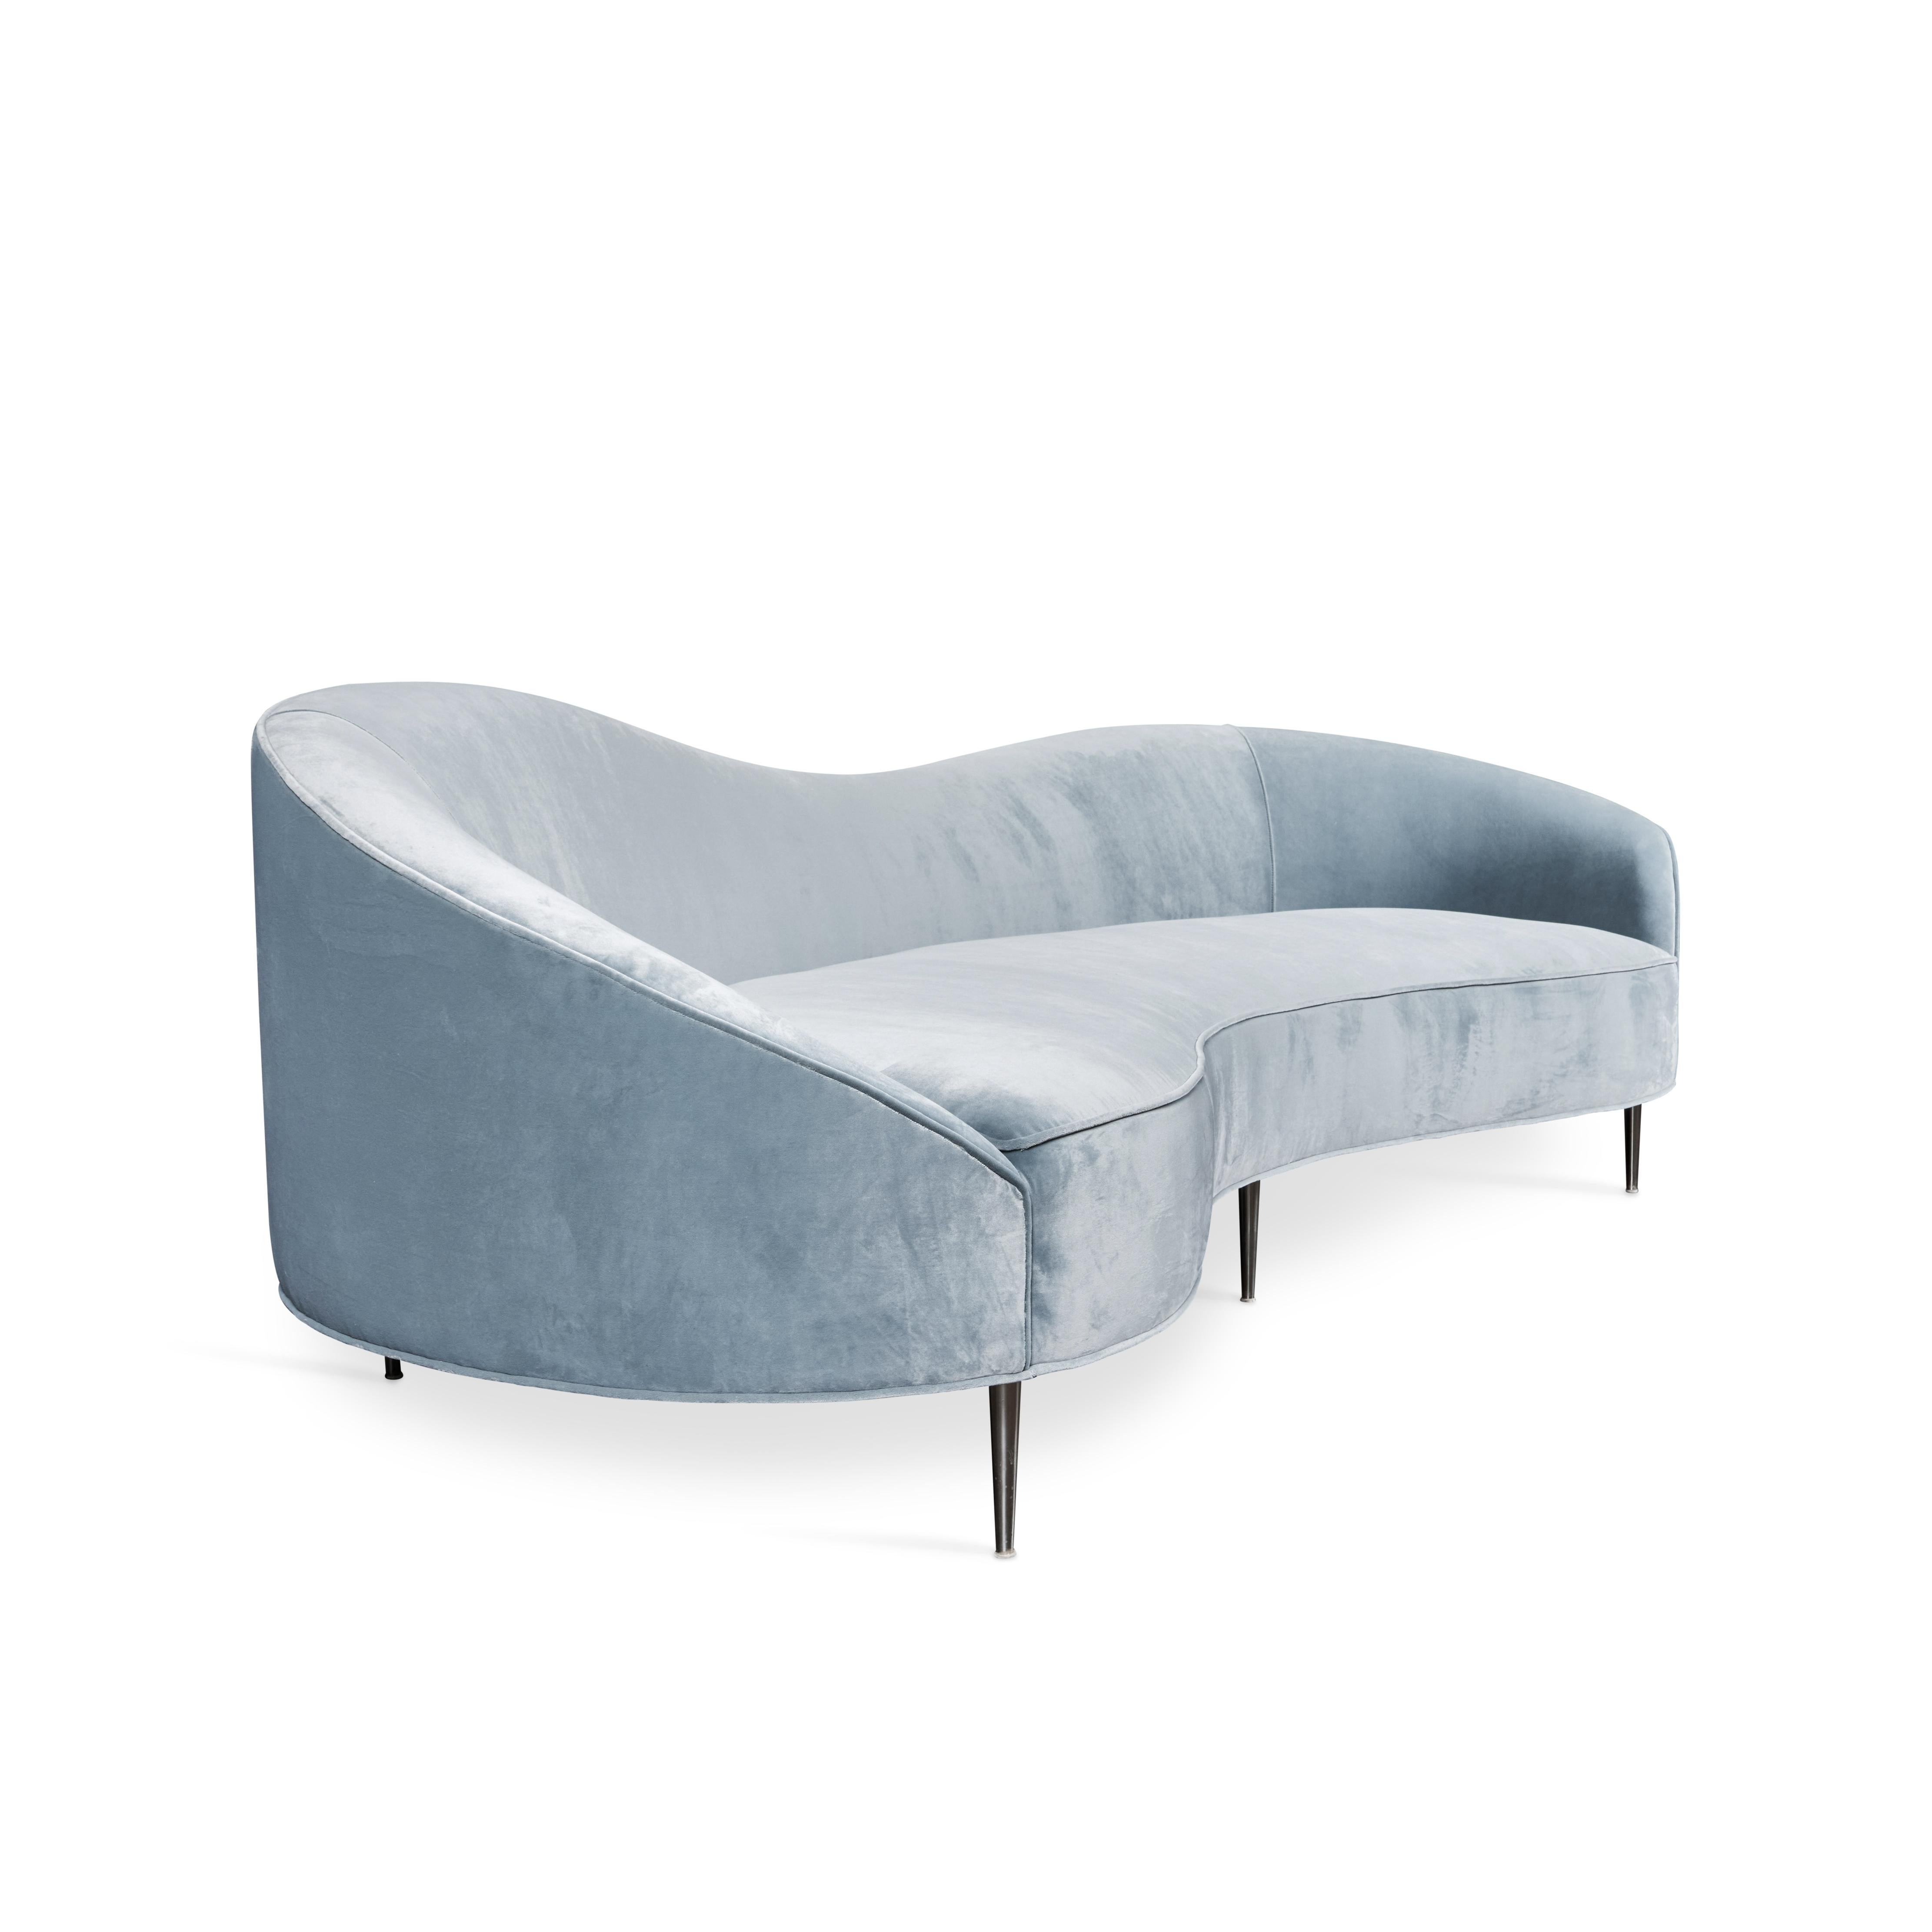 Contemporary sofa in a curved serpentine shape with polished chrome legs.  Sofa has been newly reupholstered in a lush pale aqua Corraggio velvet.